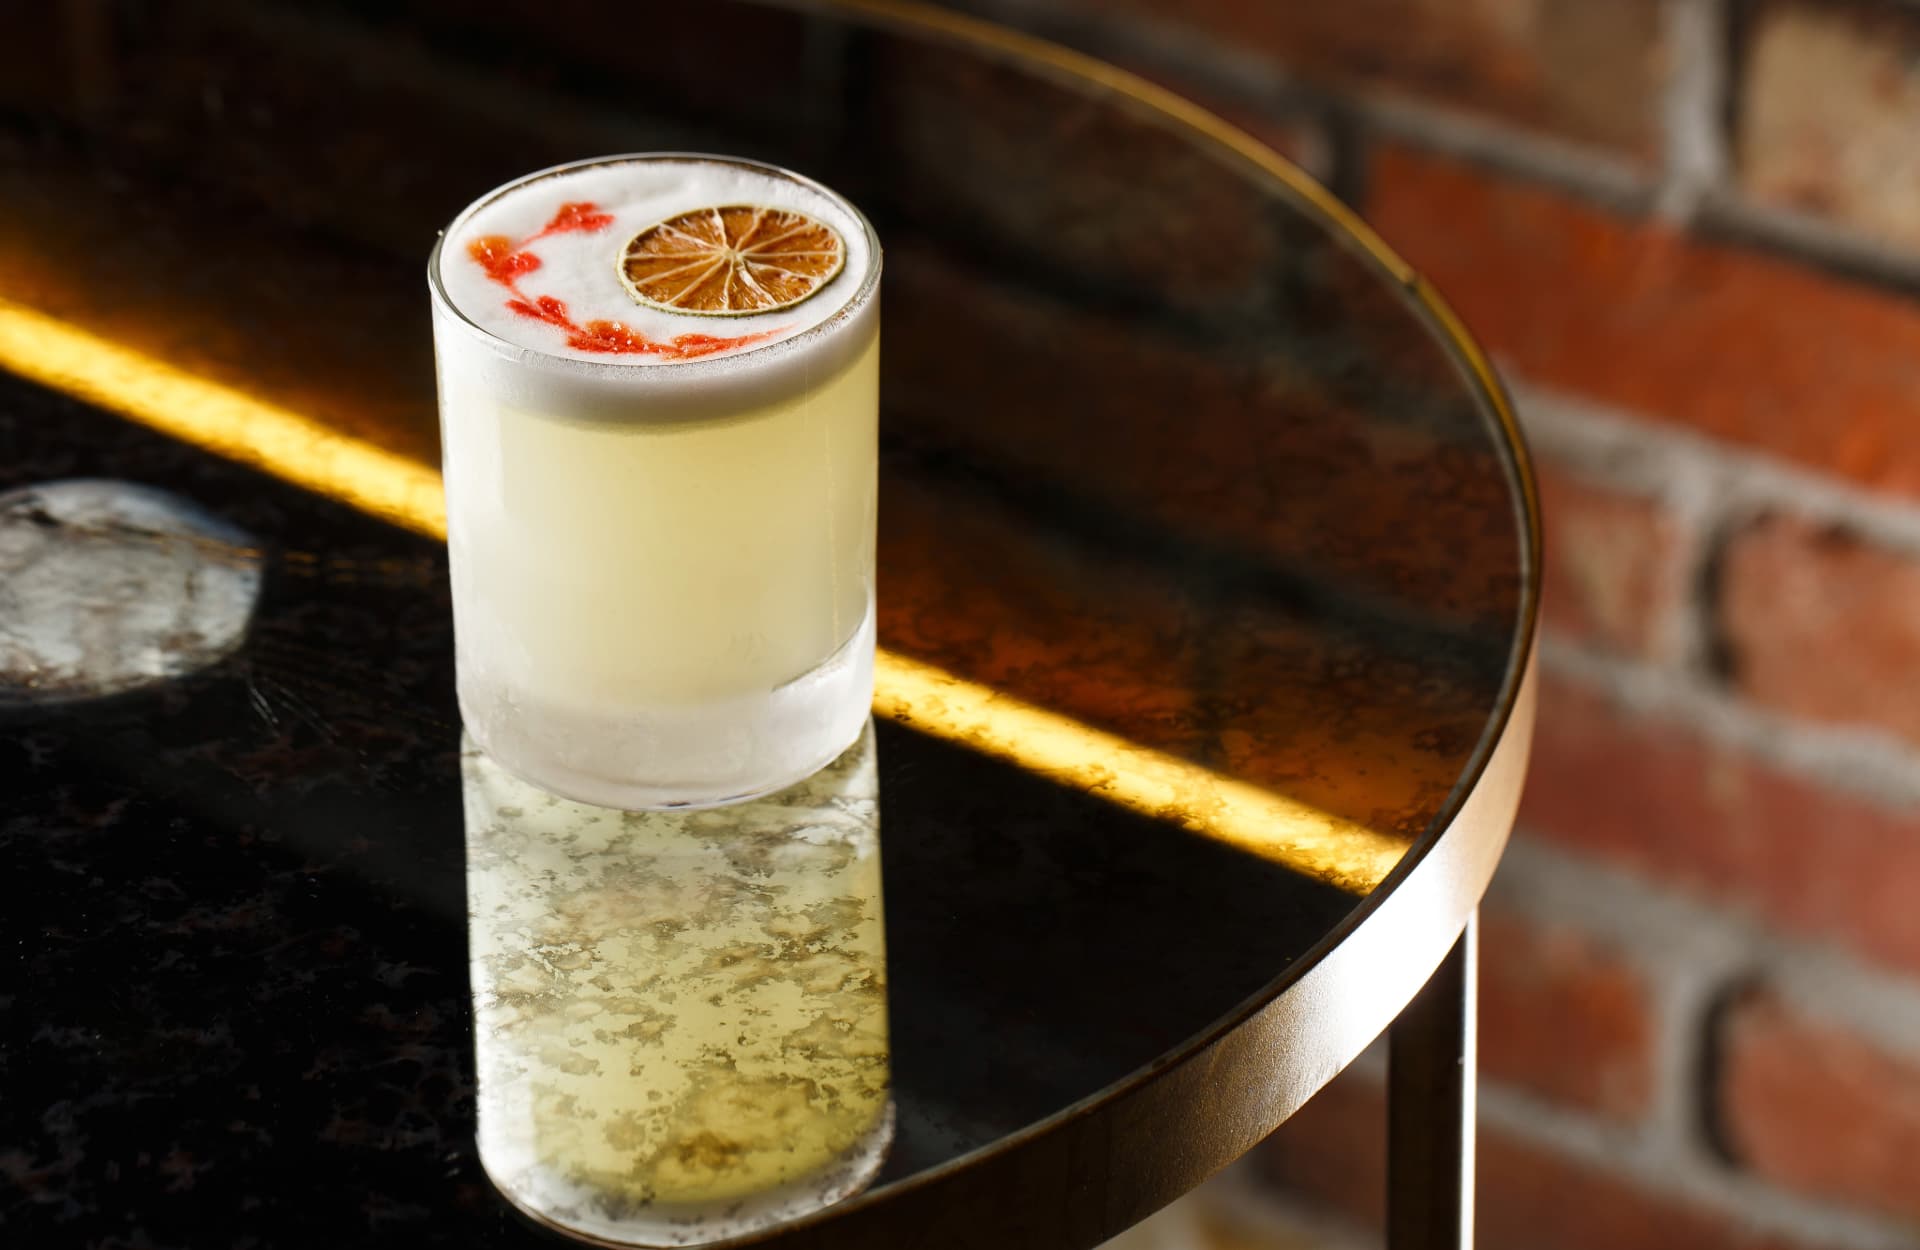 Pisco Sour is the most iconic Peruvian alcoholic beverage.